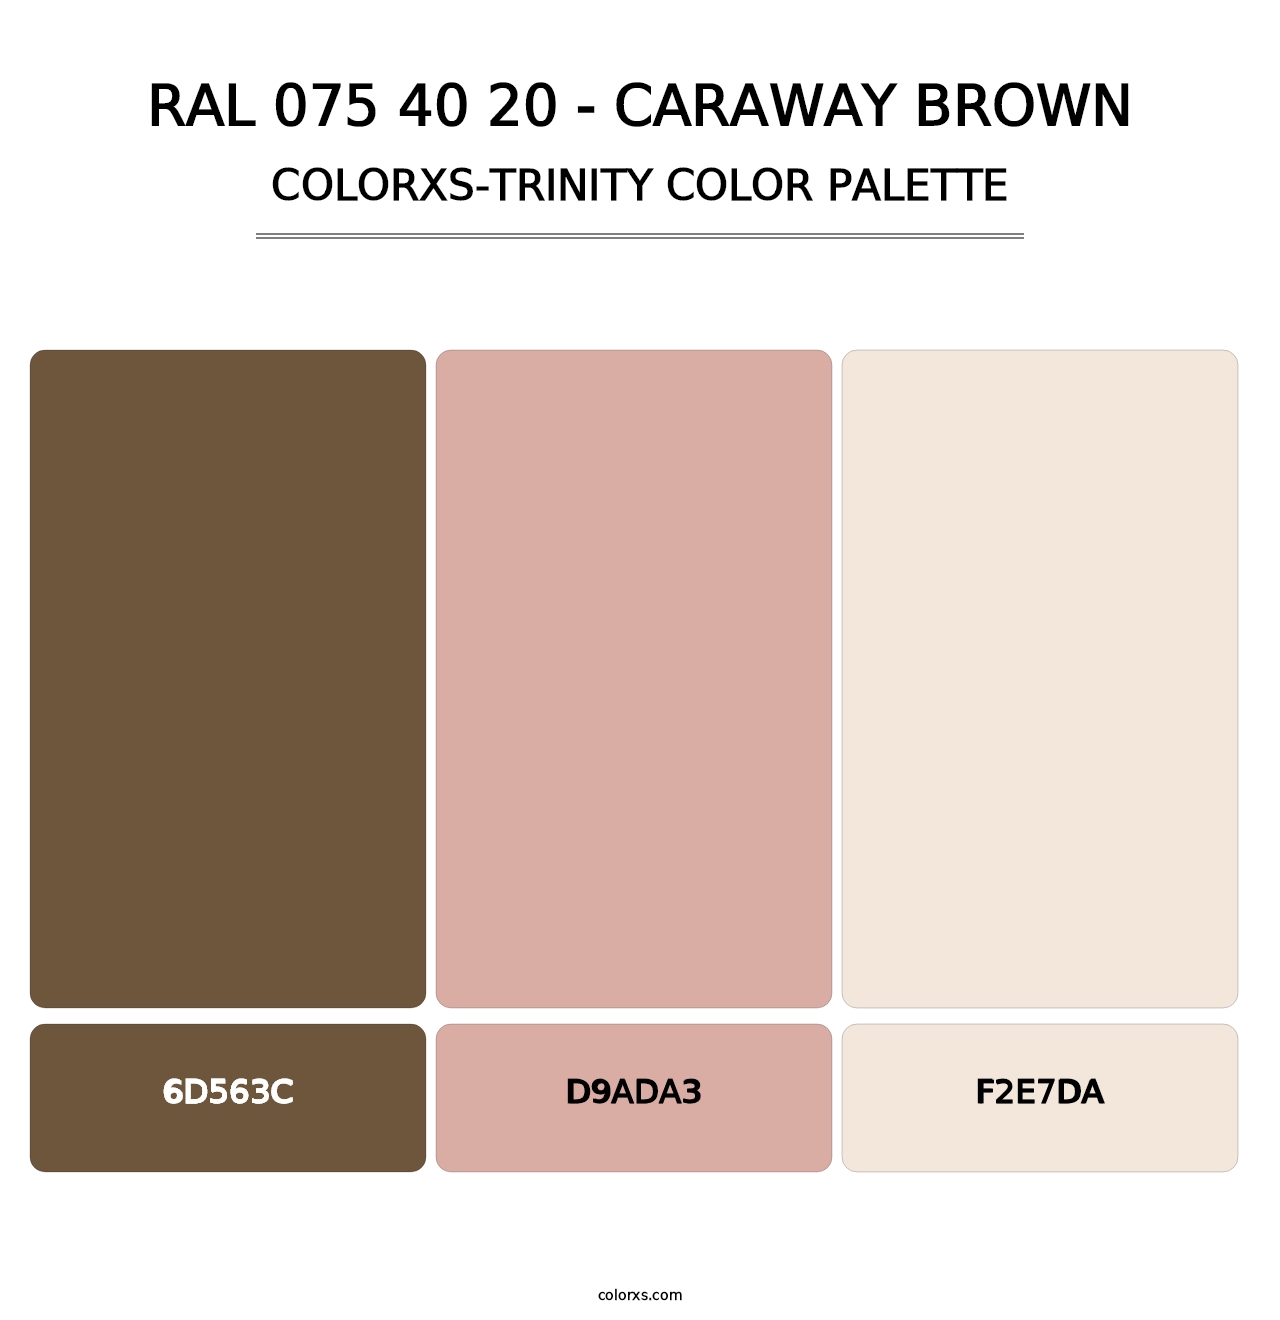 RAL 075 40 20 - Caraway Brown - Colorxs Trinity Palette